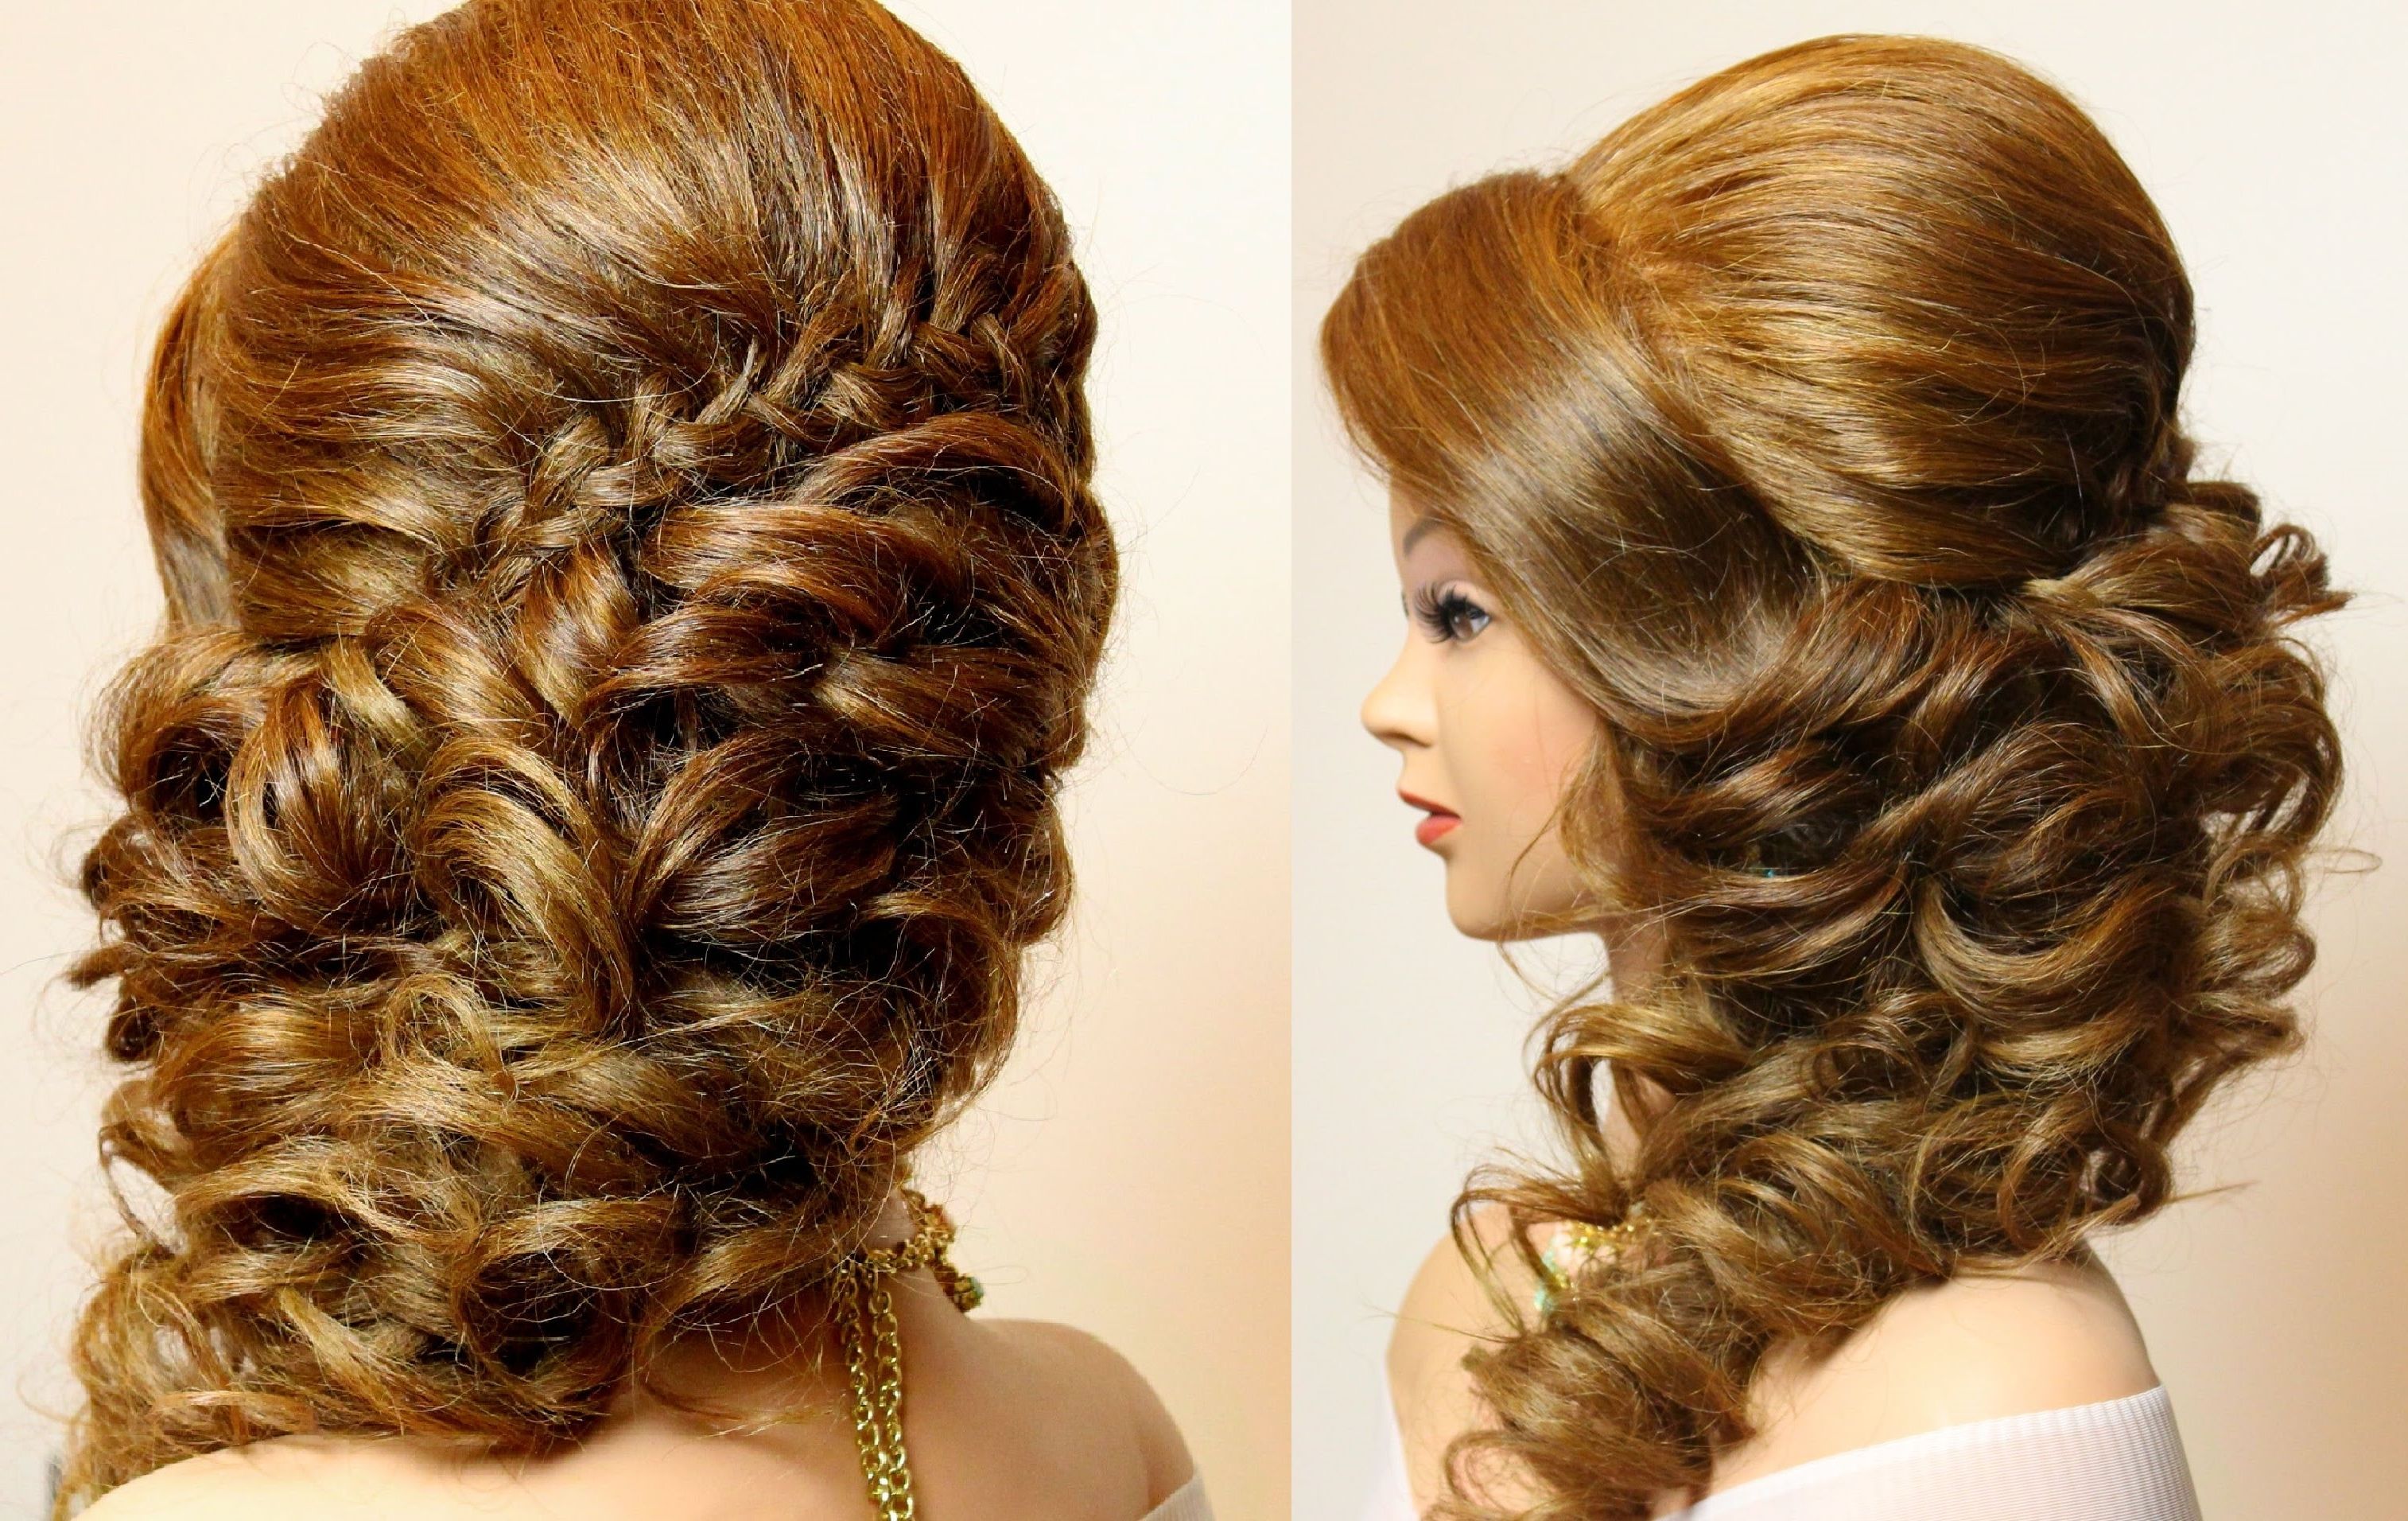 Widely Used Wedding Hairstyles For Curly Hair With Regard To Bridal Hairstyle With Braid And Curls (View 8 of 15)